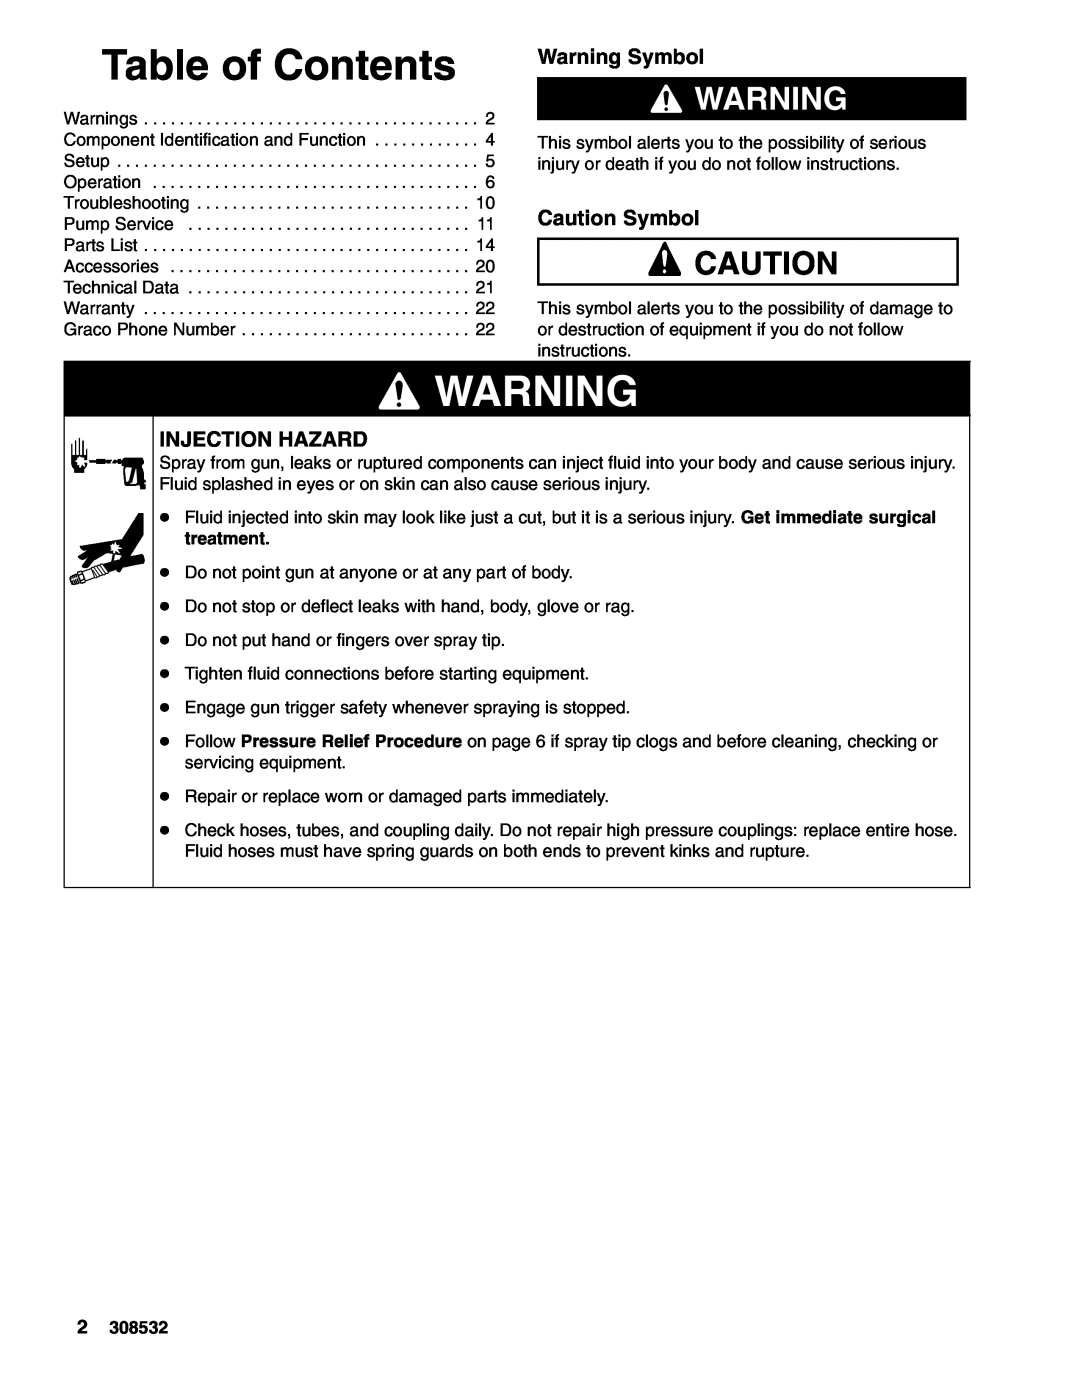 Hitachi 4043 important safety instructions Table of Contents, Warning Symbol, Caution Symbol, Injection Hazard 